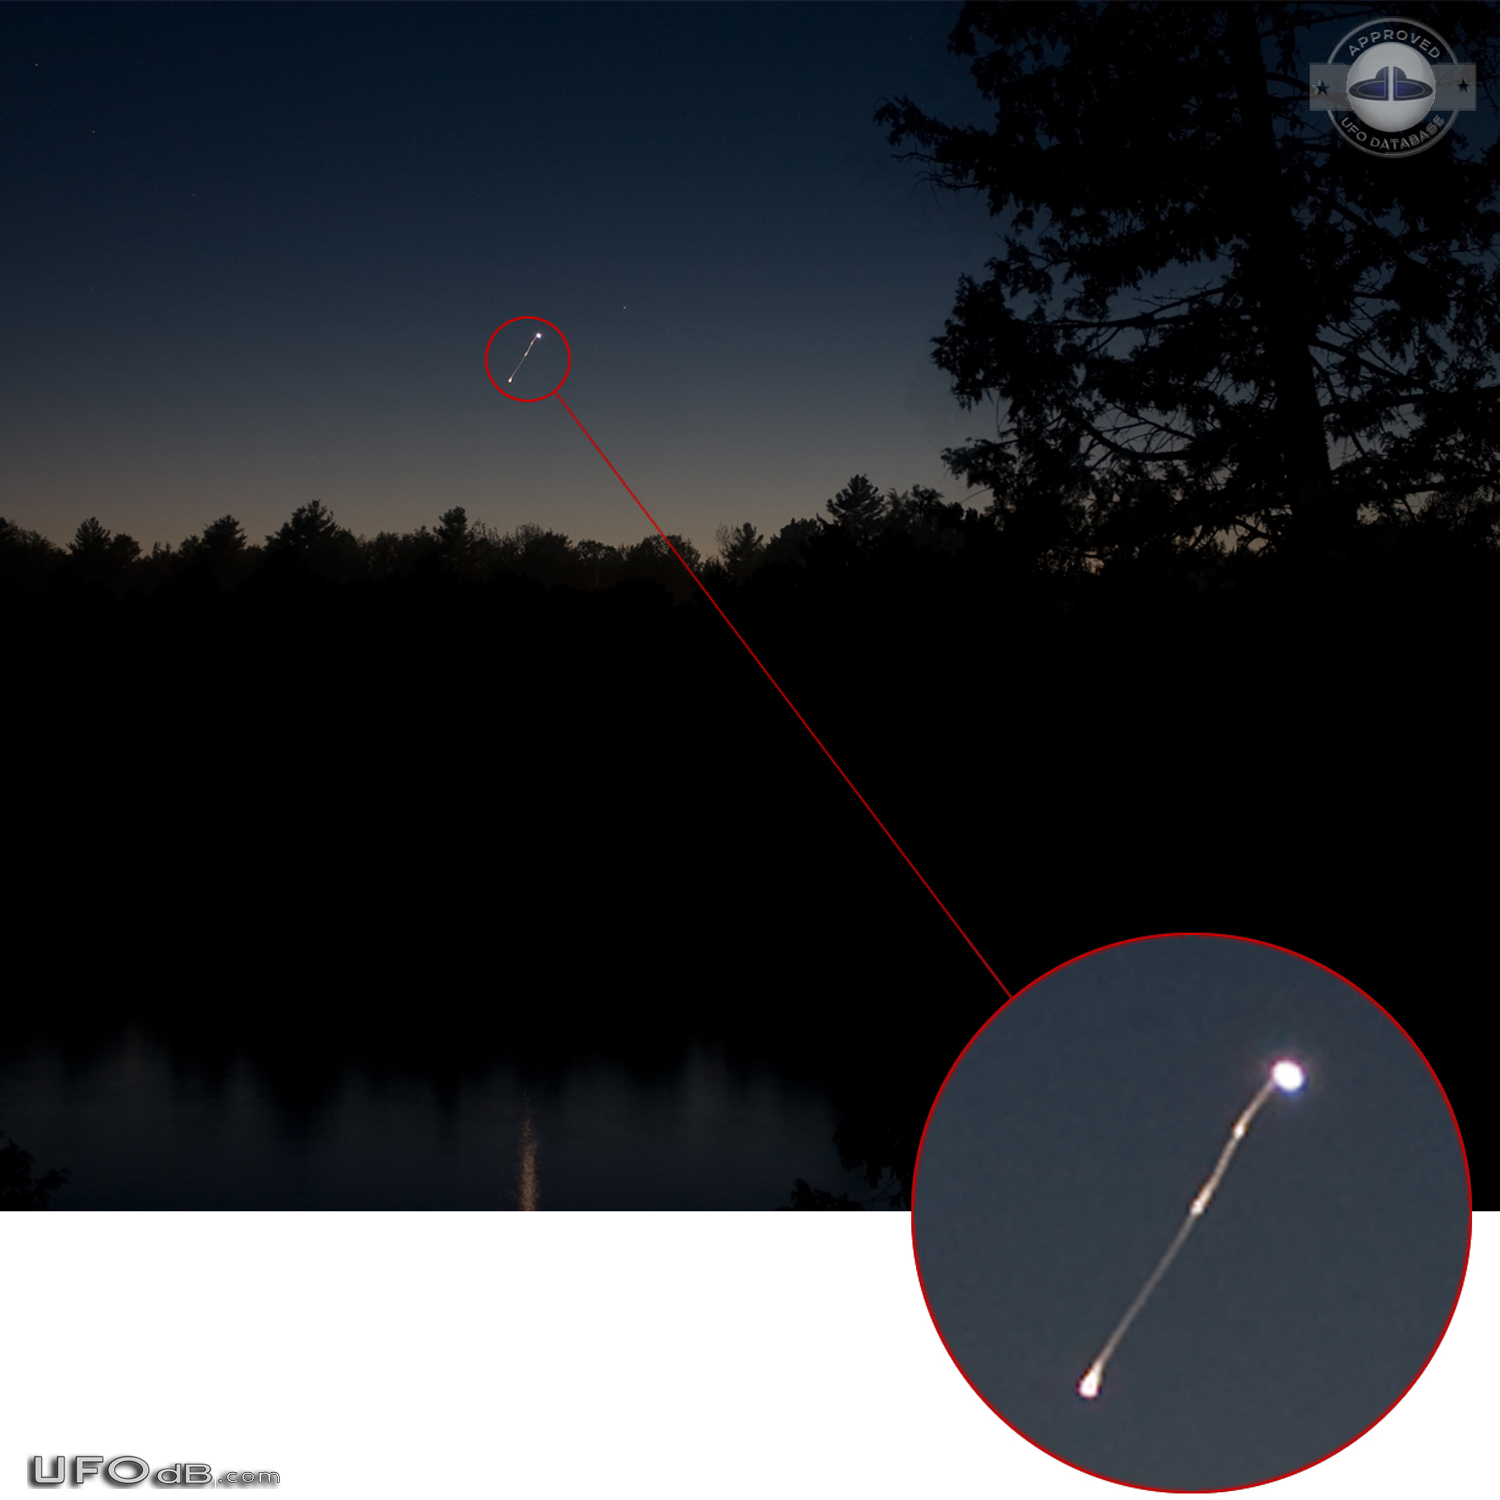 Mysterious Lights UFOS Observed Near Apsley Ontario Canada 2015 UFO Picture #721-1